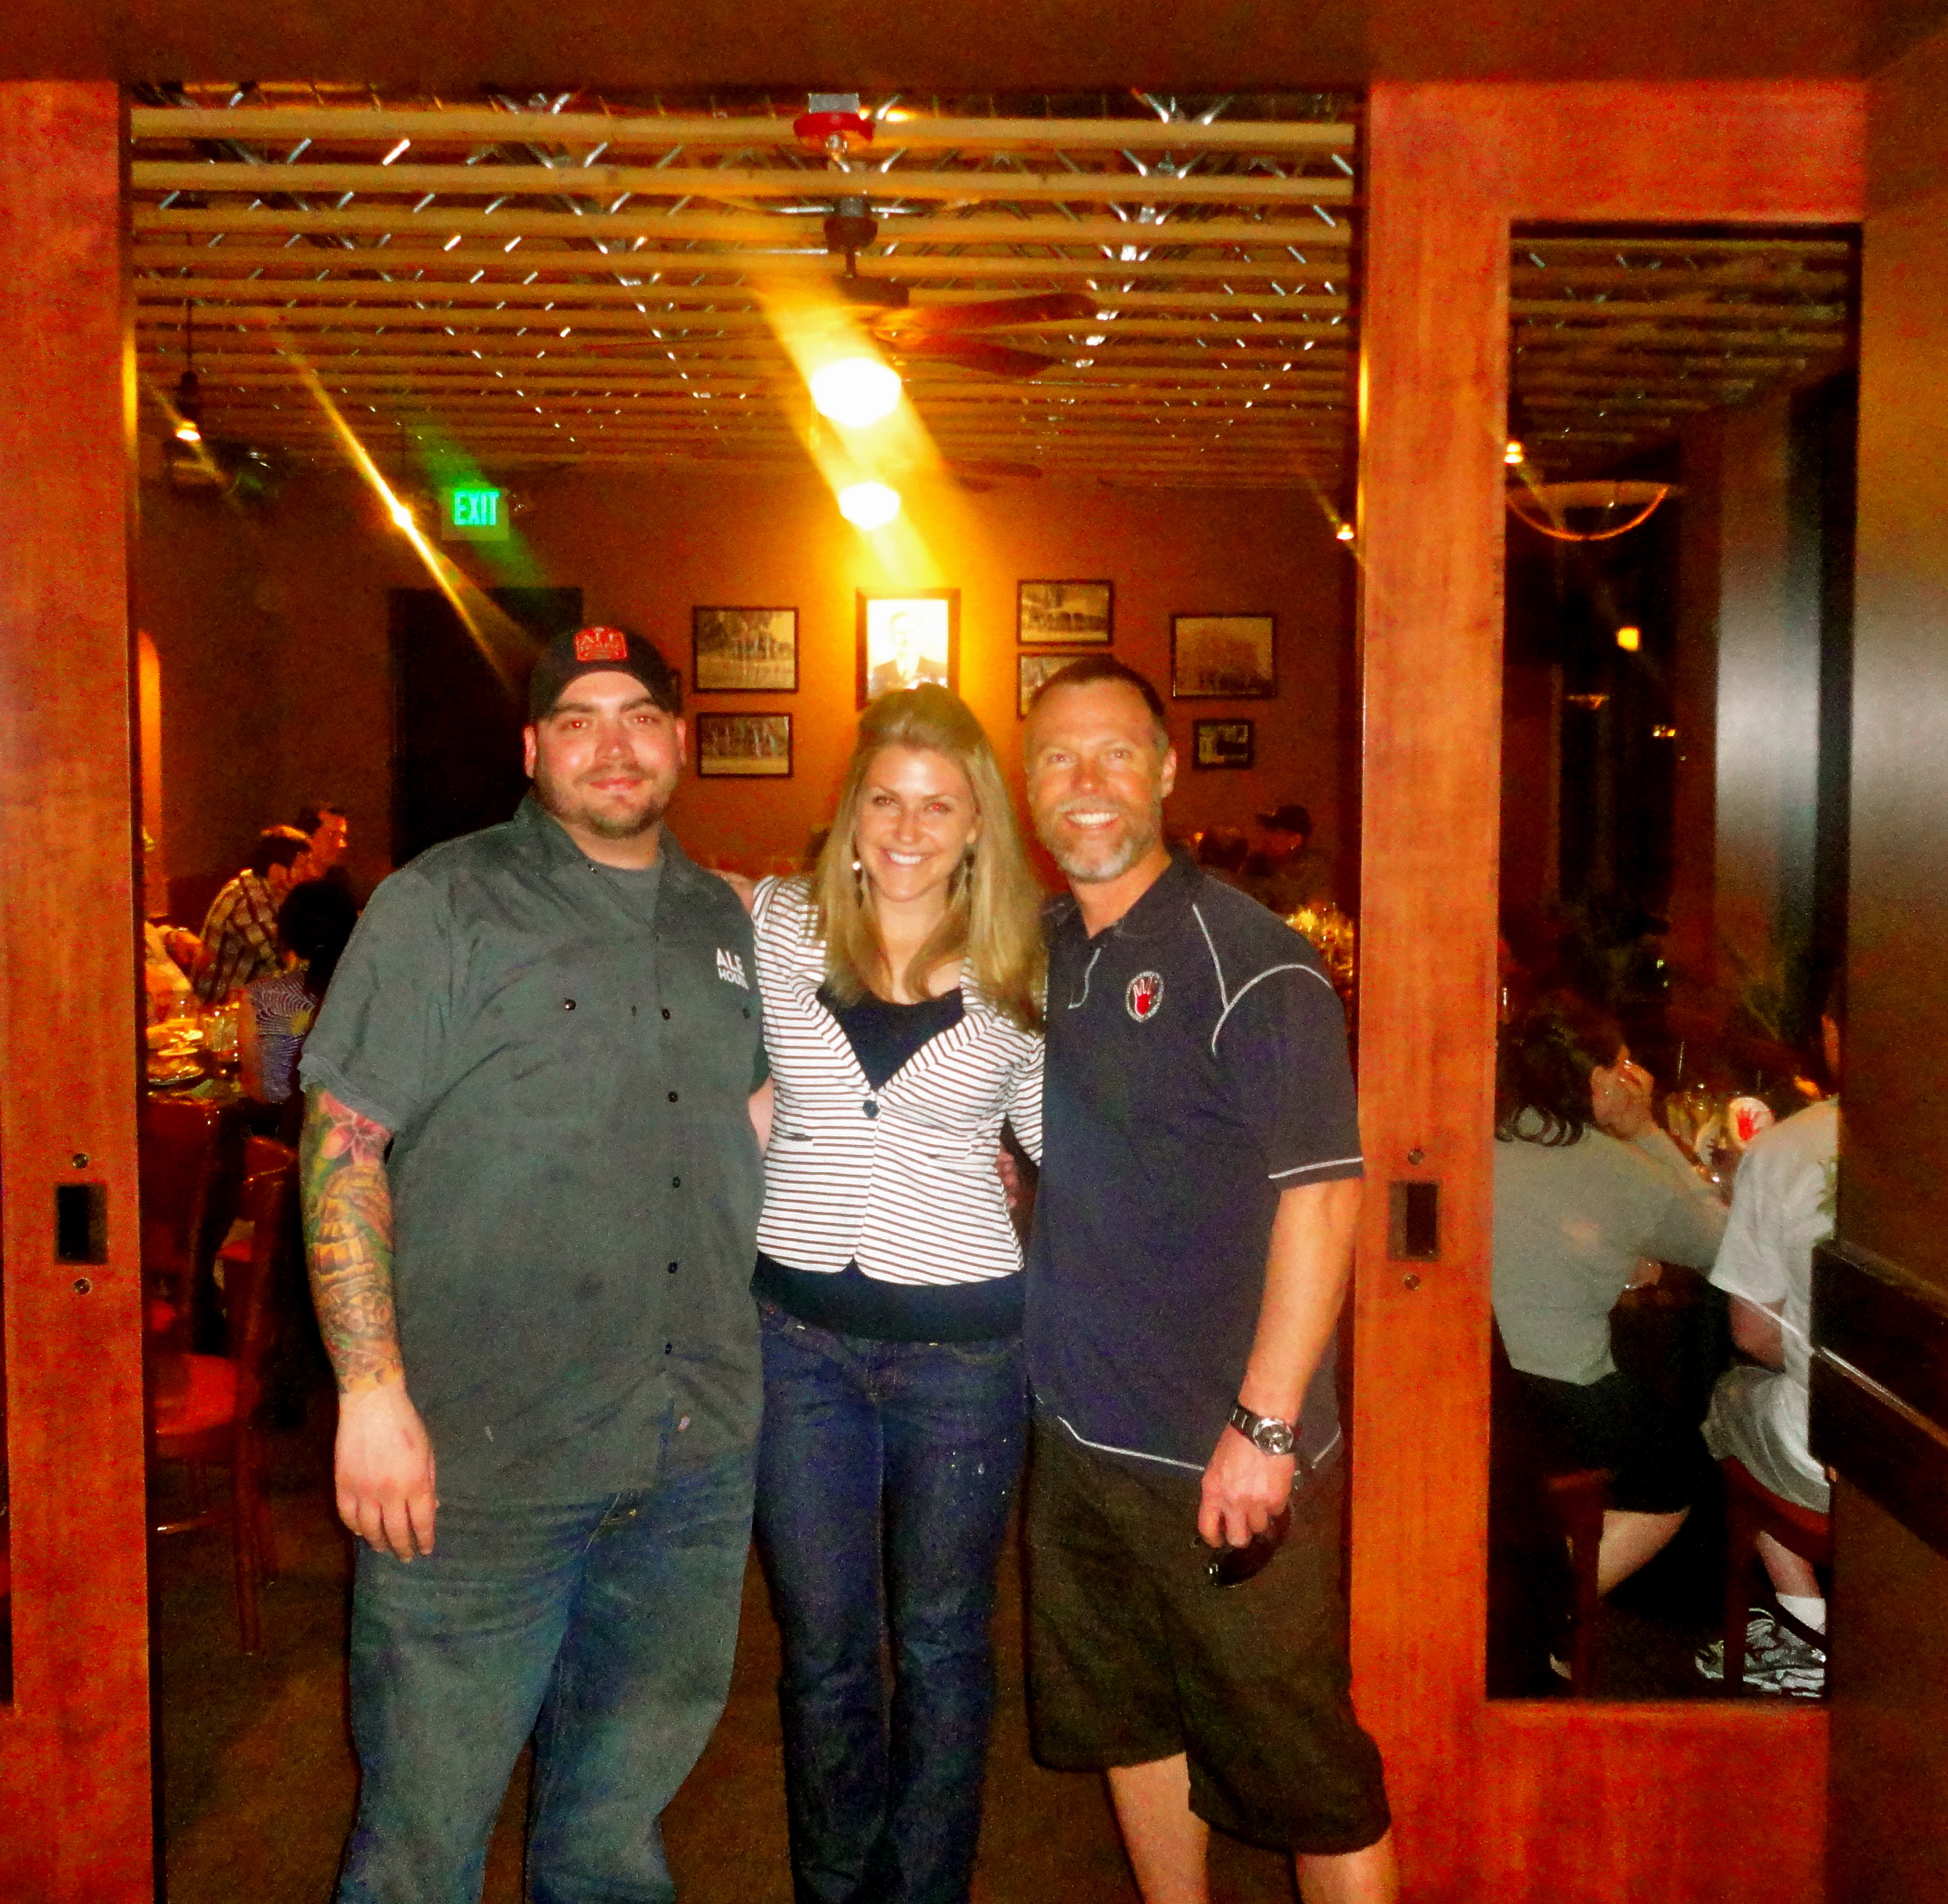 Carri Wilbanks with Charley Sinden of Ale House and Josh Breckel of Left Hand Brewing Company